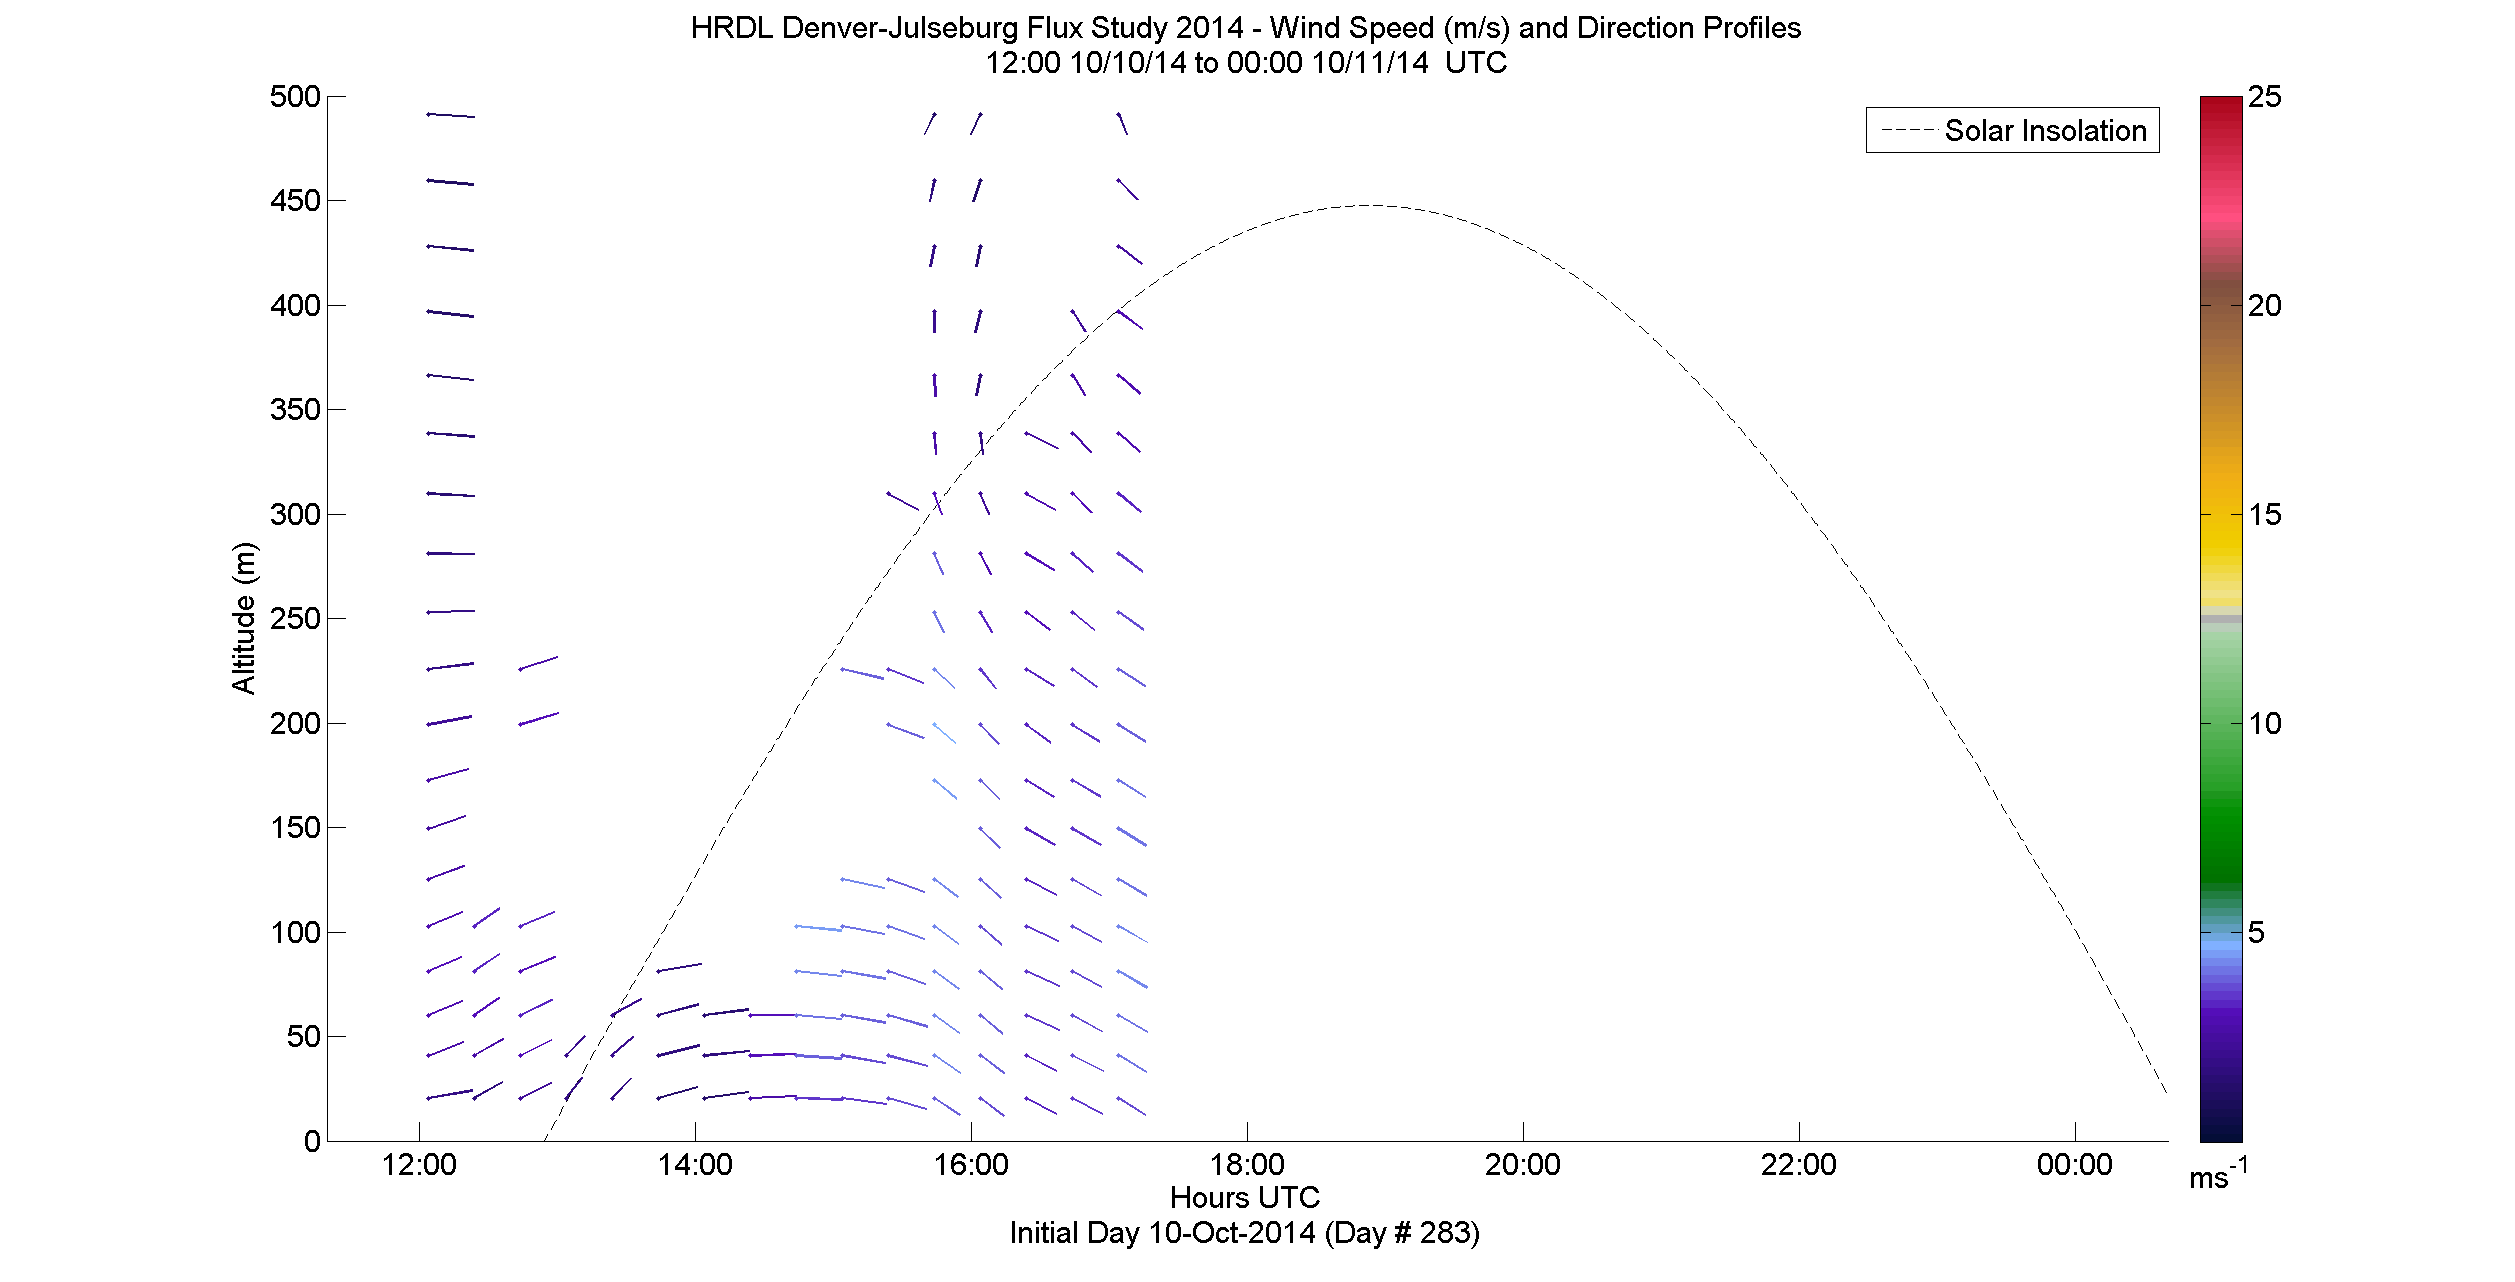 HRDL speed and direction profile - October 10 pm